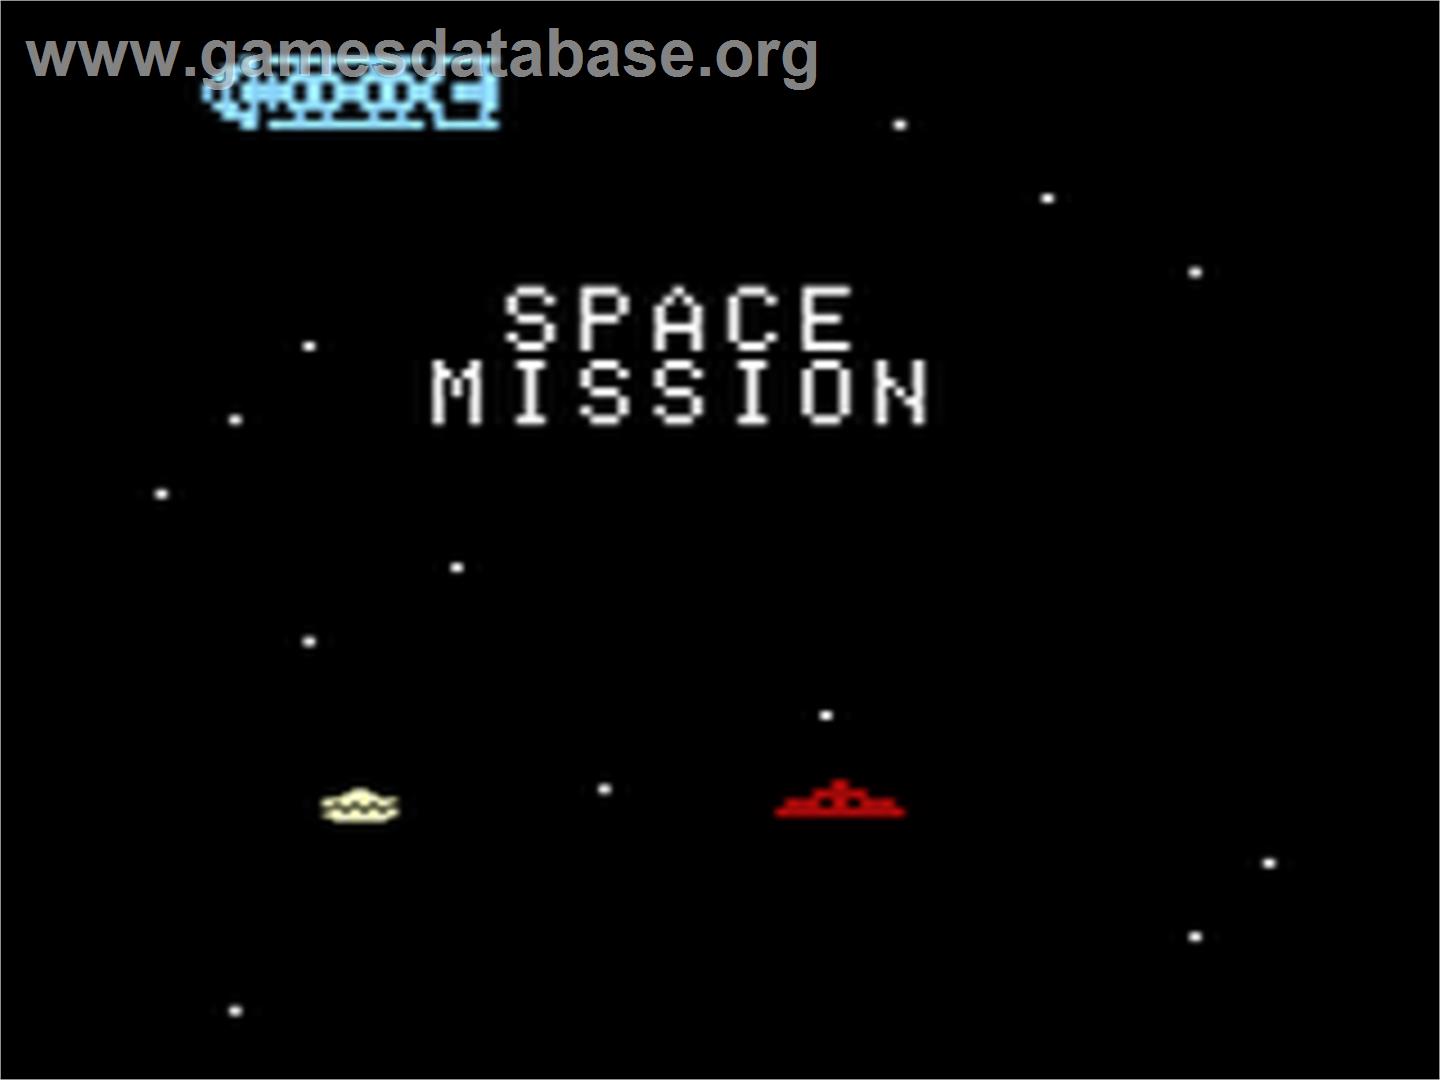 Space Mission - Emerson Arcadia 2001 - Artwork - Title Screen